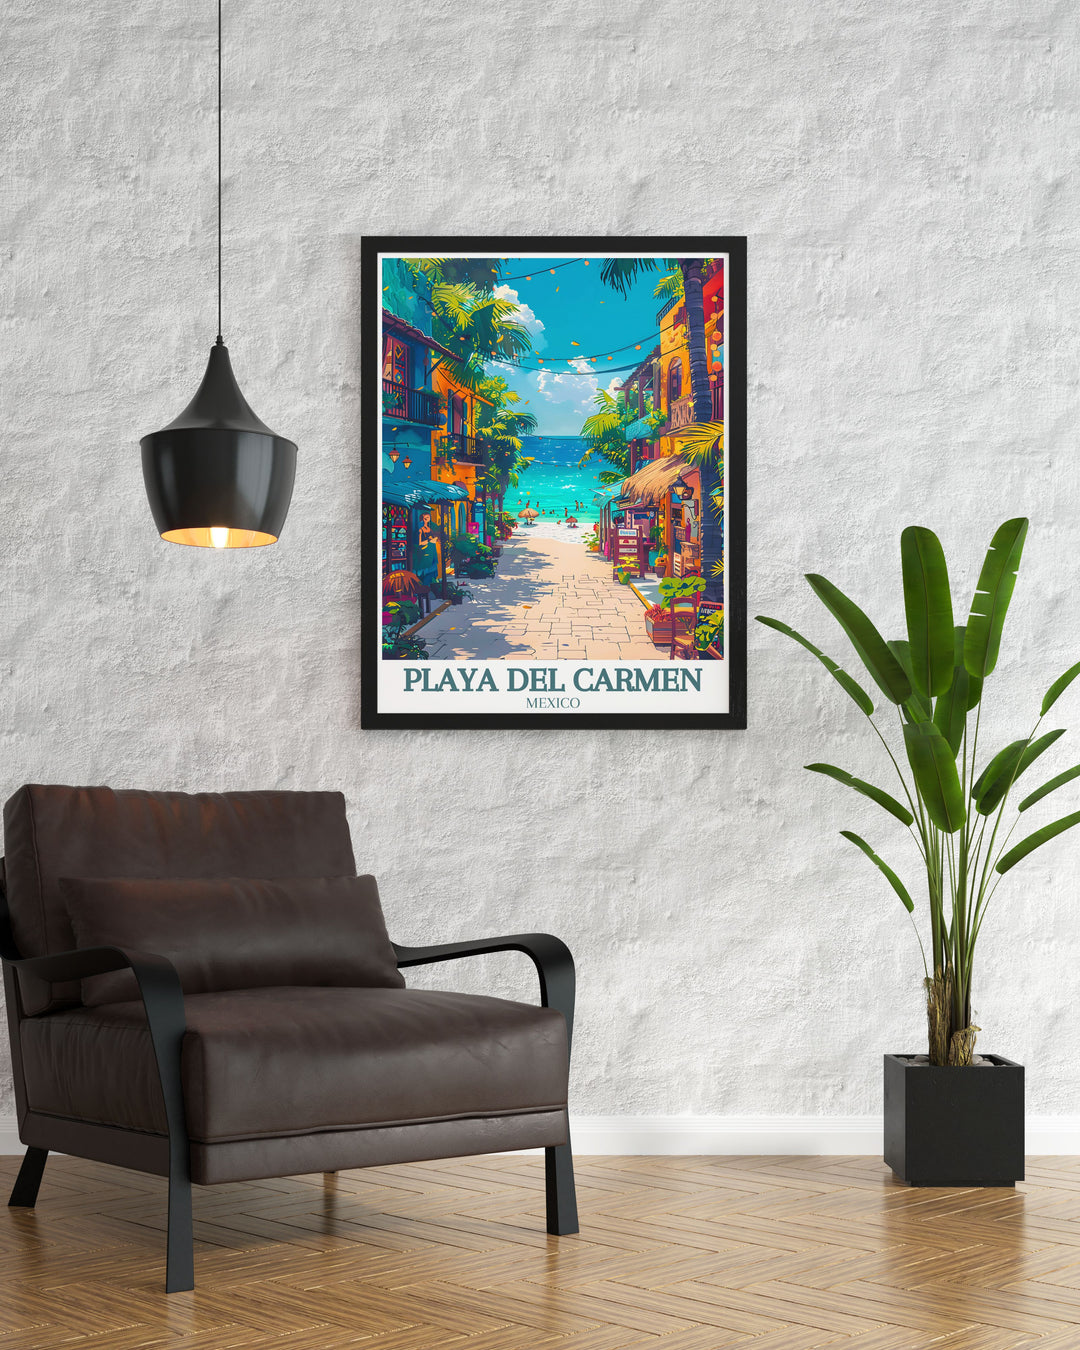 Enhance your home with this Mexico travel print featuring Playa Del Carmens La Quinta Avenida and the Caribbean Sea a perfect addition to any decor bringing a touch of paradise to your space.